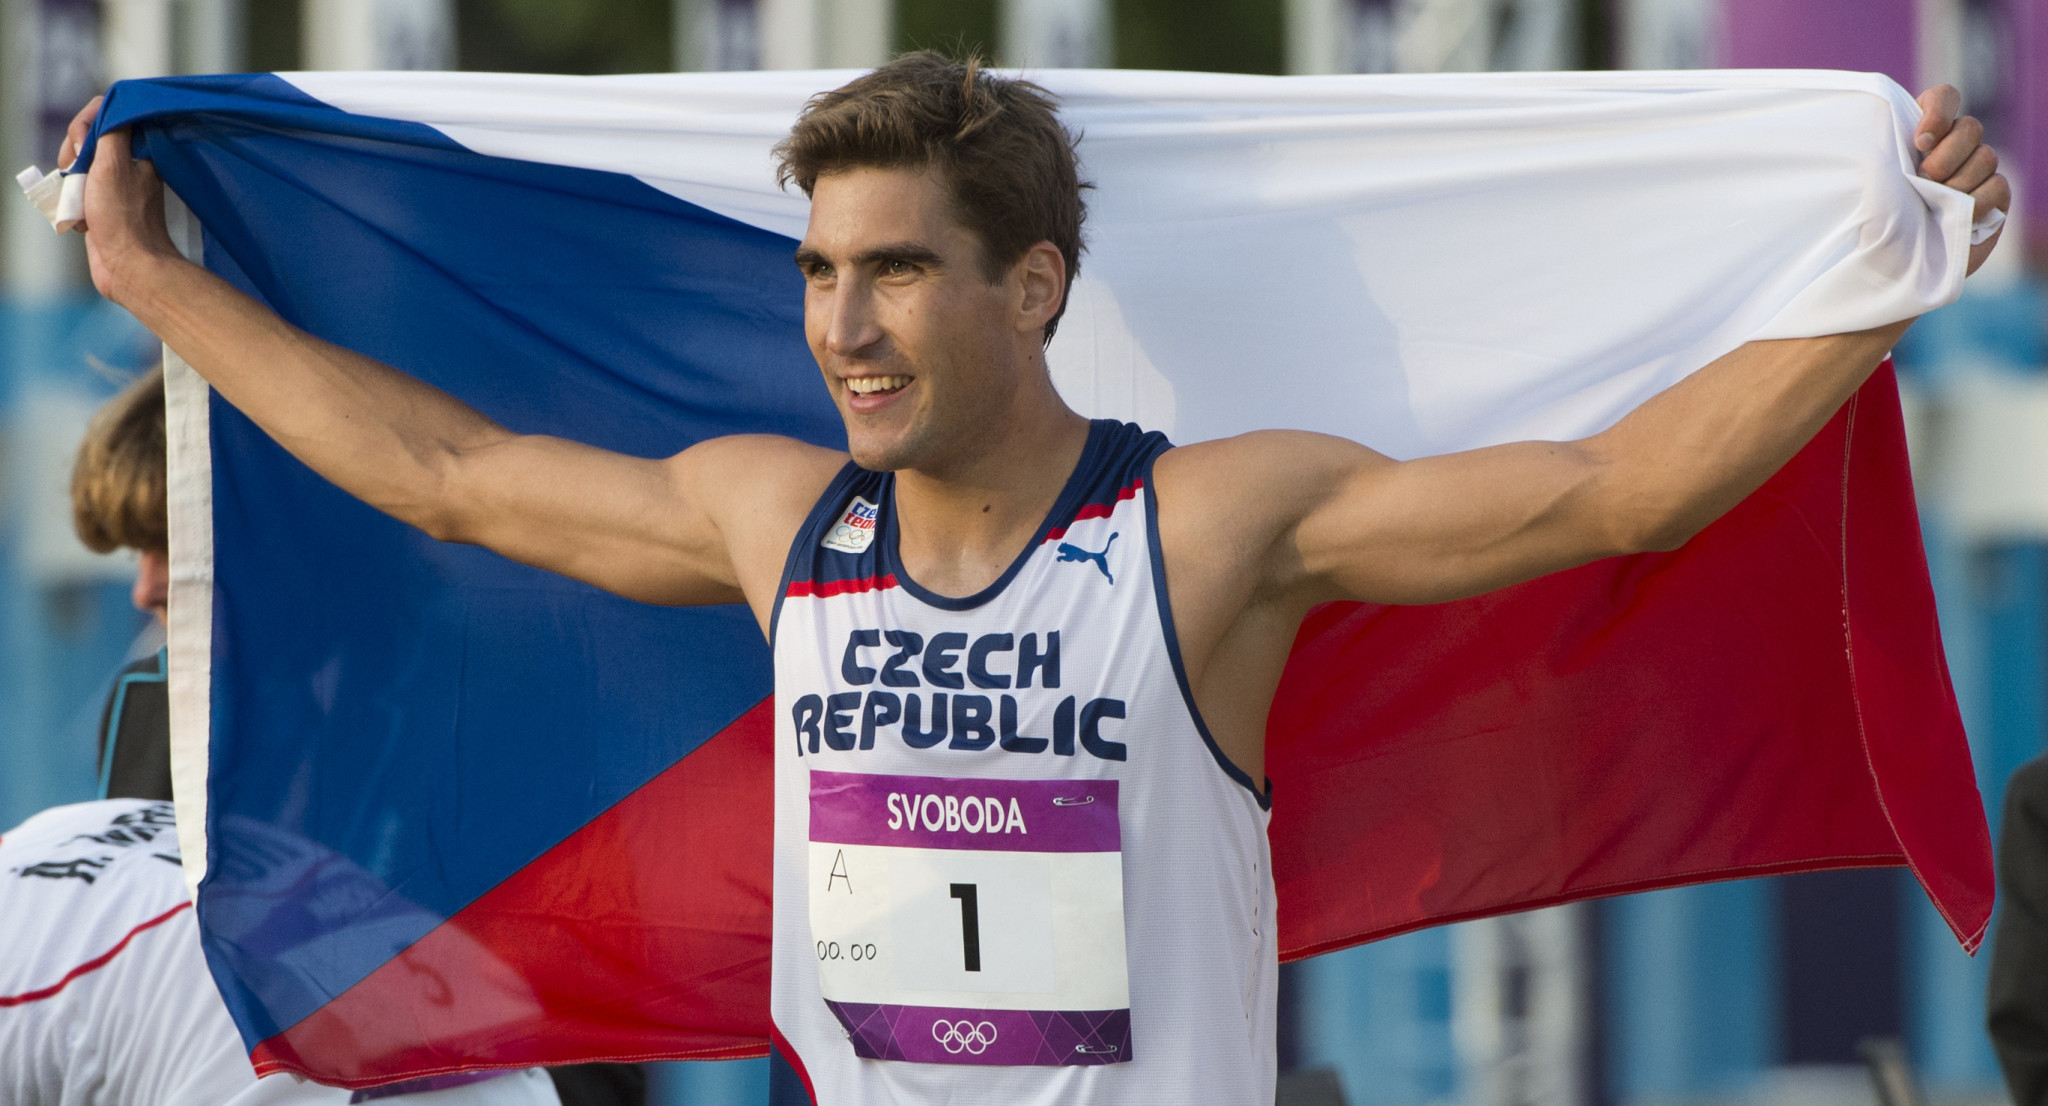 Czech Republic's former modern pentathlon Olympic champion David Svoboda claimed the UN General Assembly verdict on the war in Ukraine "could easily be a mistake" ©Getty Images